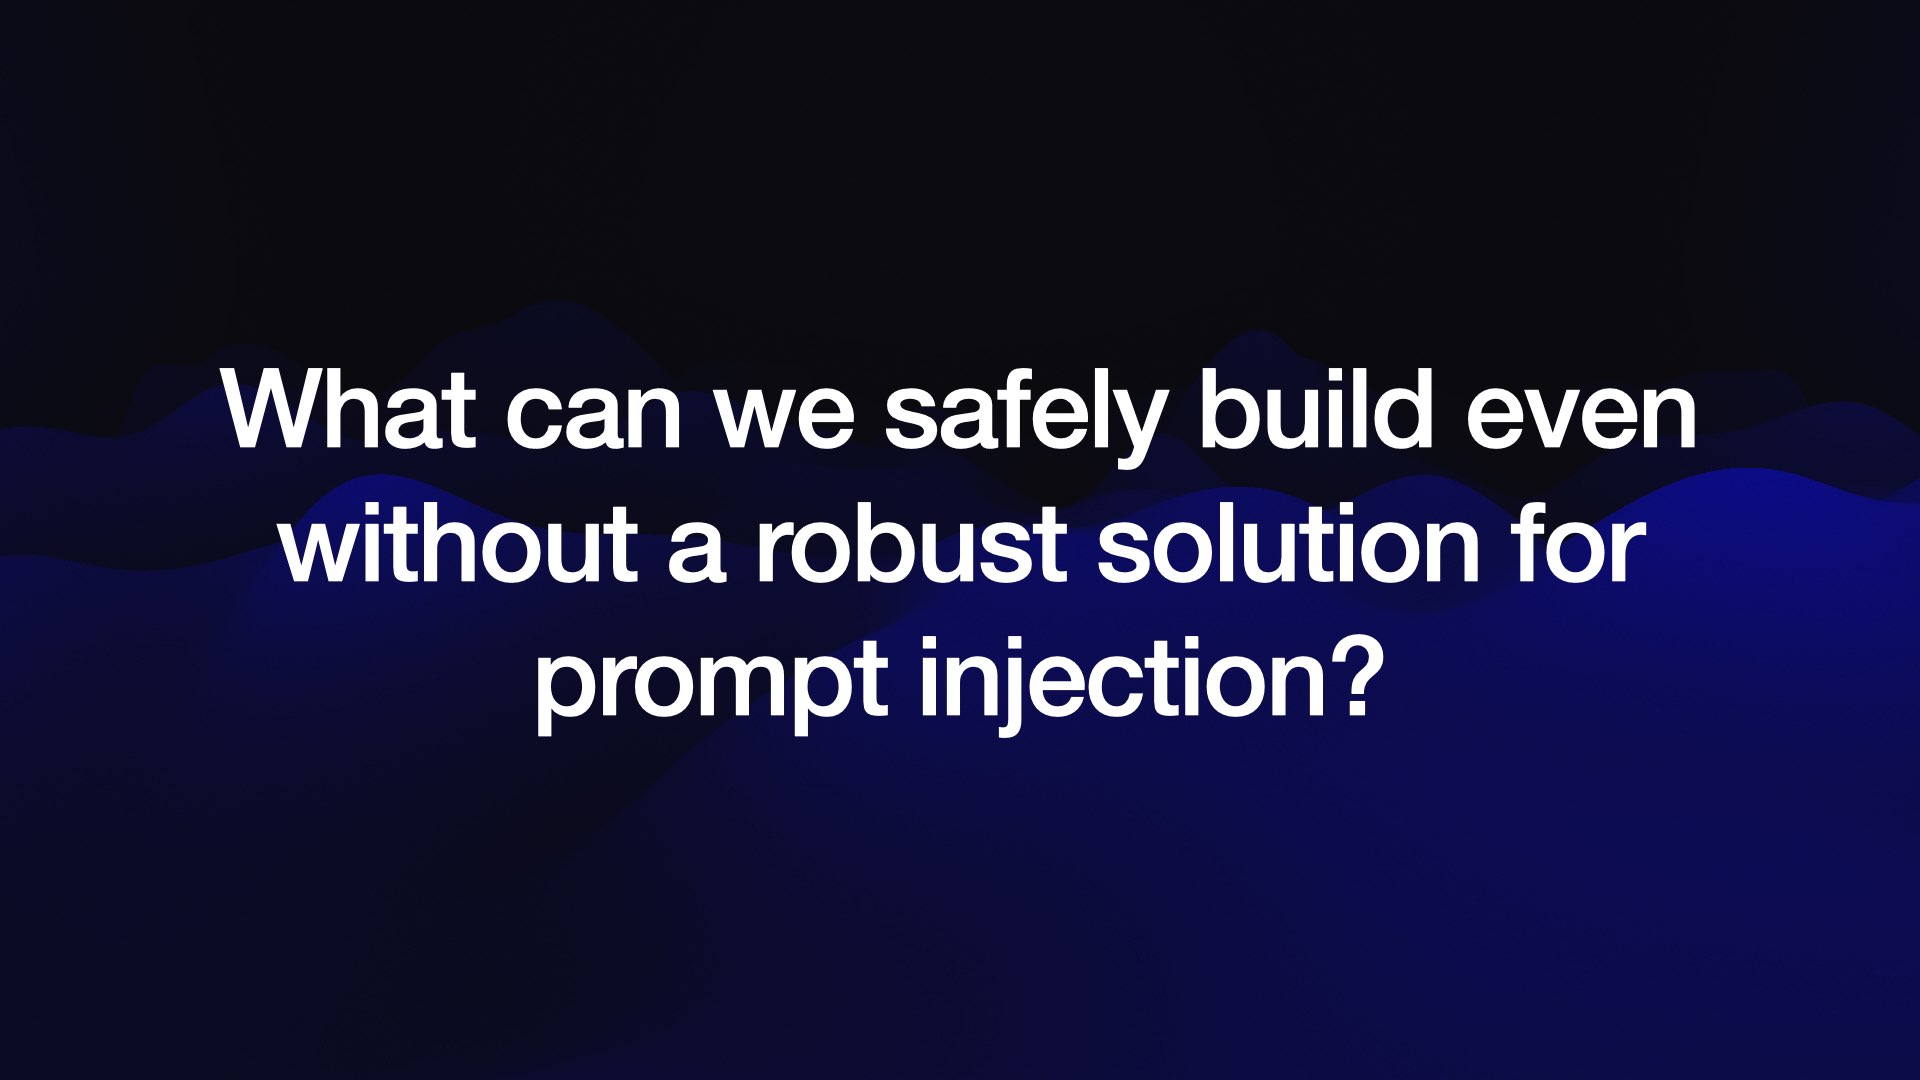 What can we safely build even without a robust solution for prompt injection?